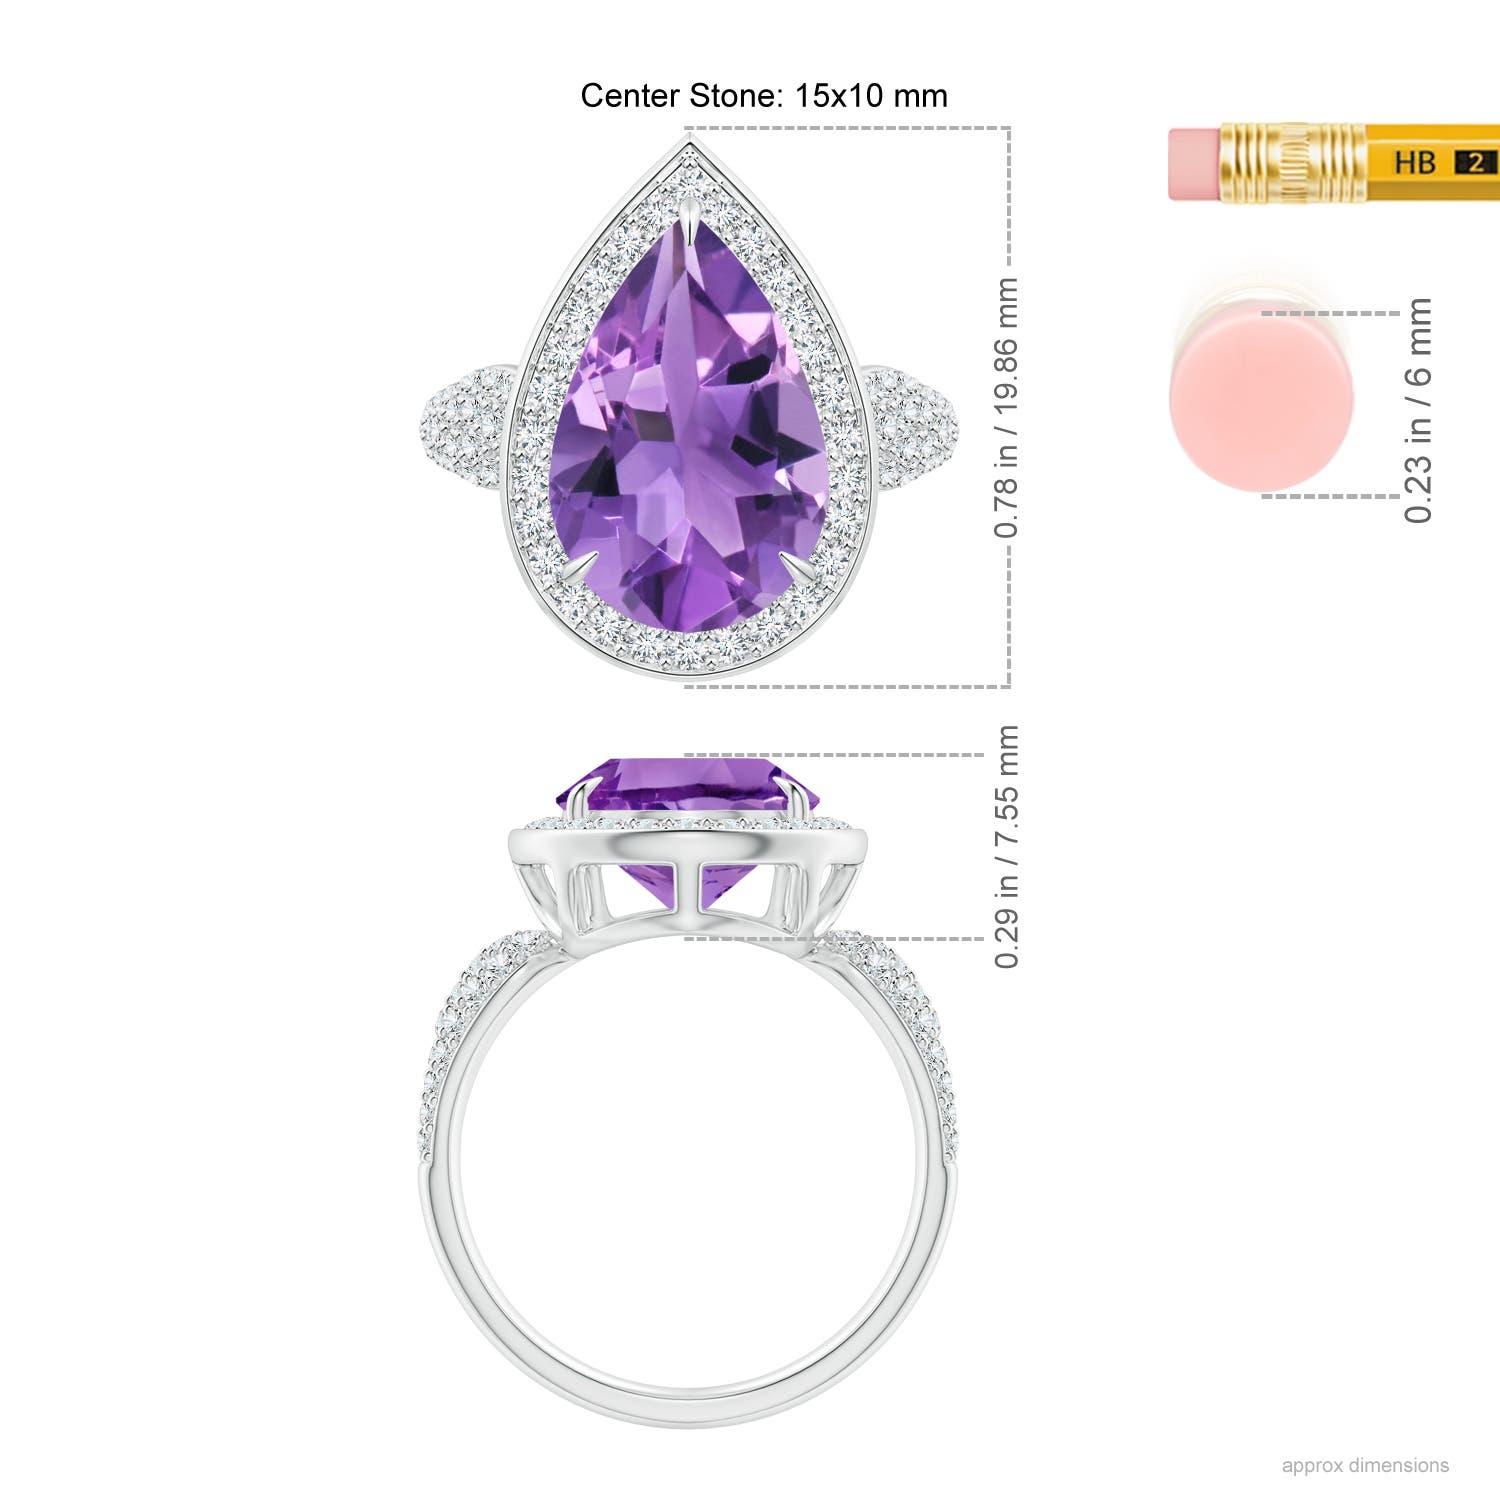 AA - Amethyst / 5.48 CT / 14 KT White Gold